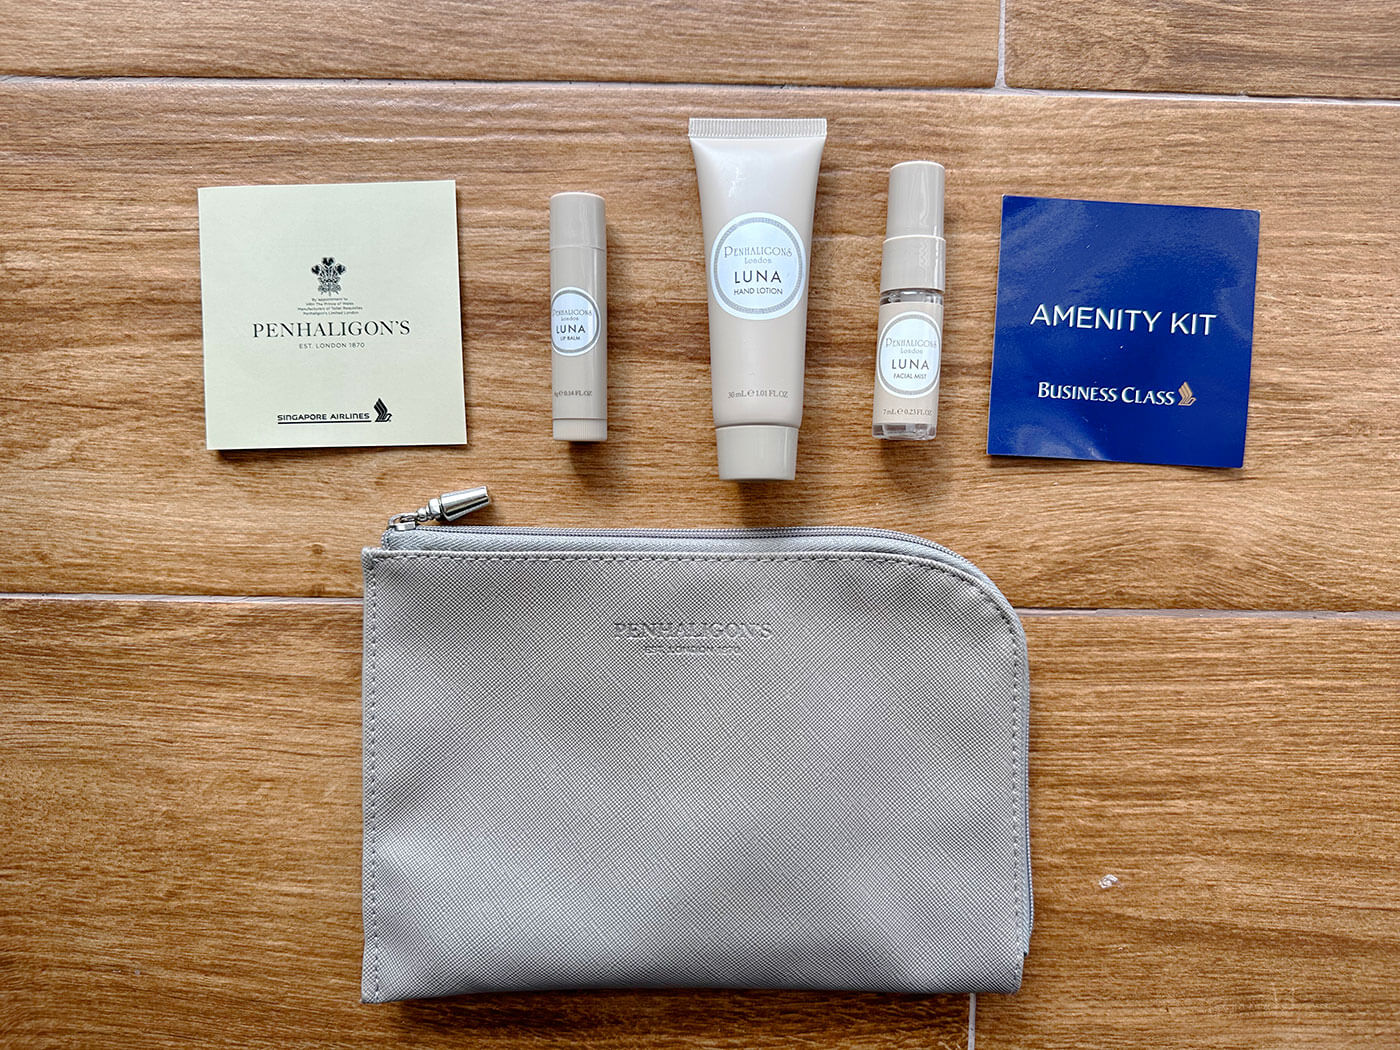 Amenities Kit from SQ Business Class